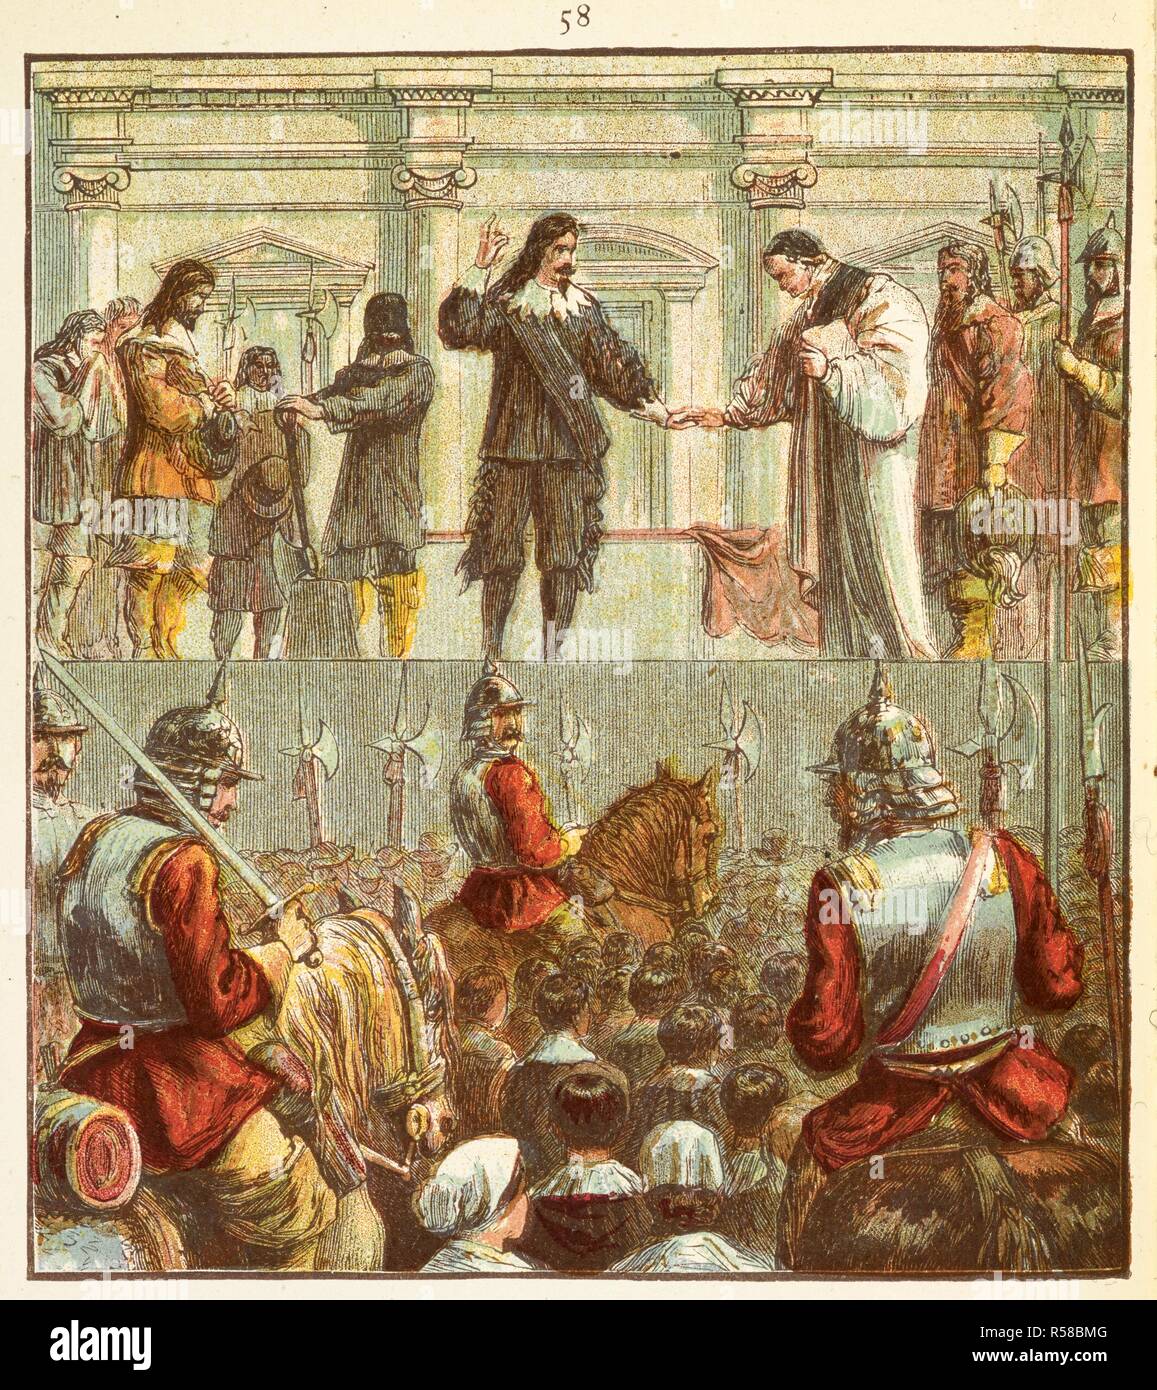 'Execution of Charles I', on 30 January 1649. Pictures of English History. From the earliest times to the present period. With ninety-three pictures, printed in colour by Kronheim. London : George Routledge & Sons, [1868]. Source: 9505.ff.6 picture 58. Language: English. Stock Photo